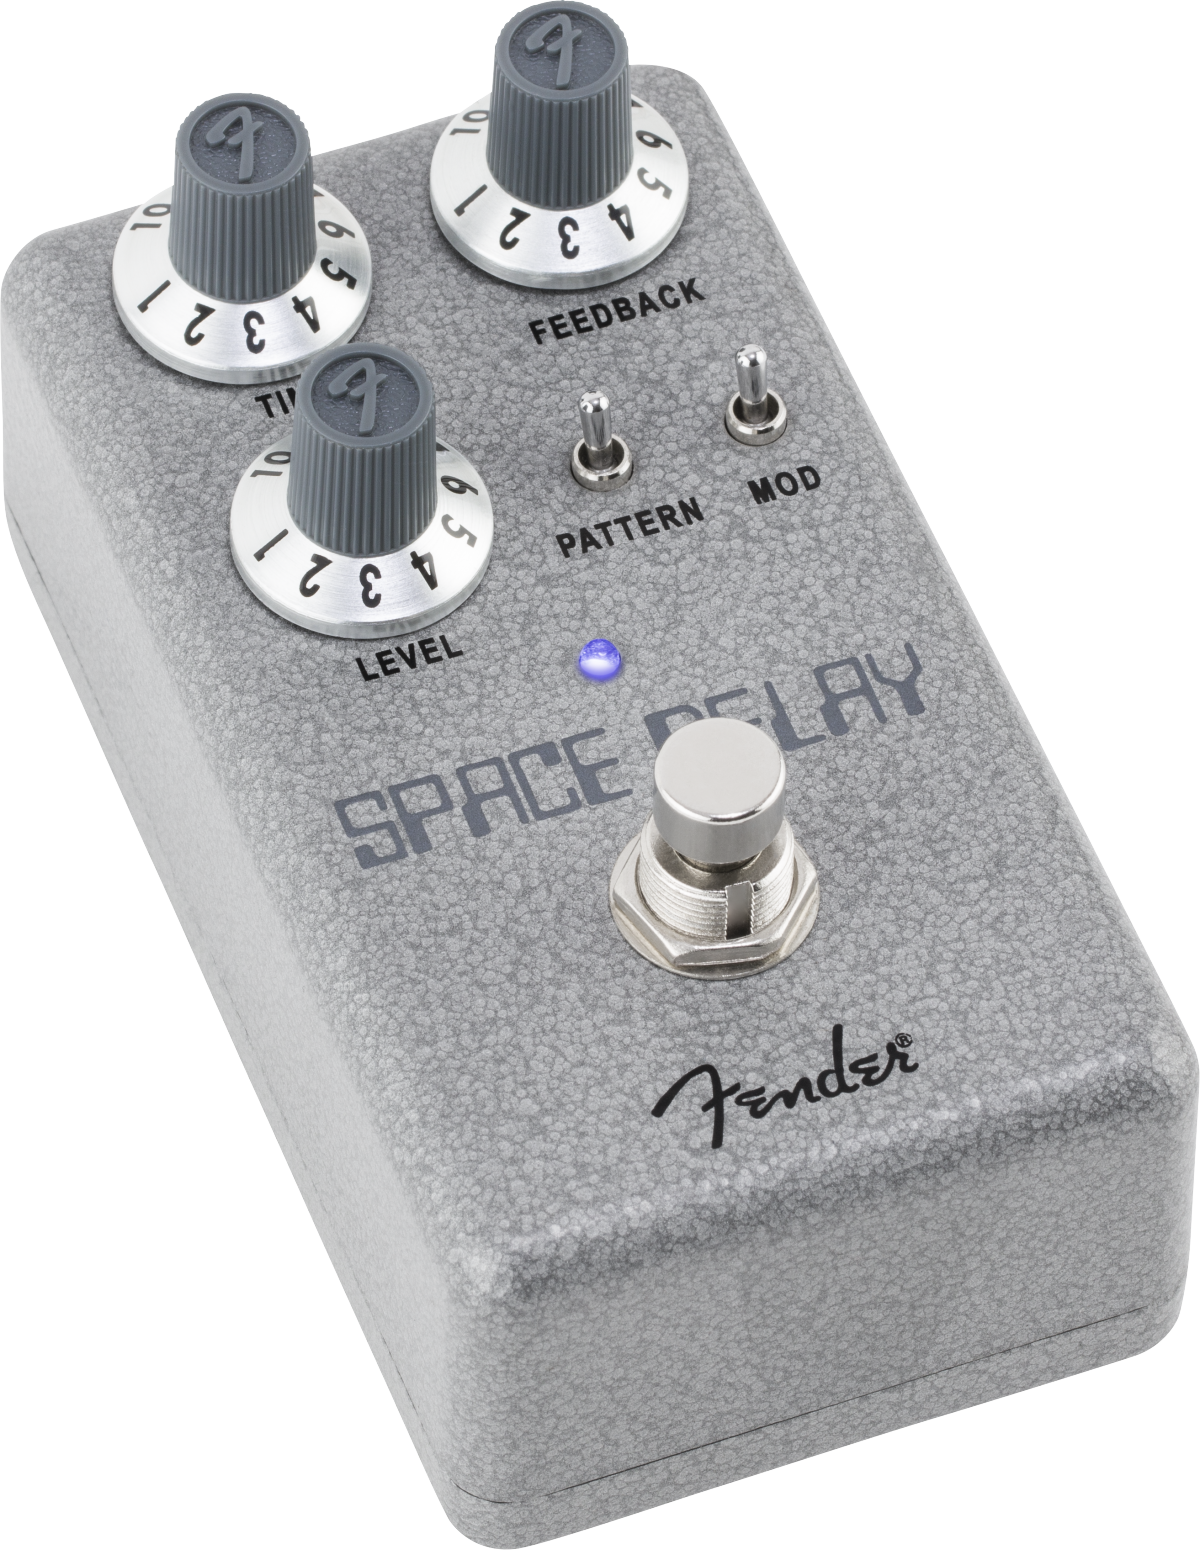 Fender Hammertone Space Delay - Reverb, delay & echo effect pedal - Main picture